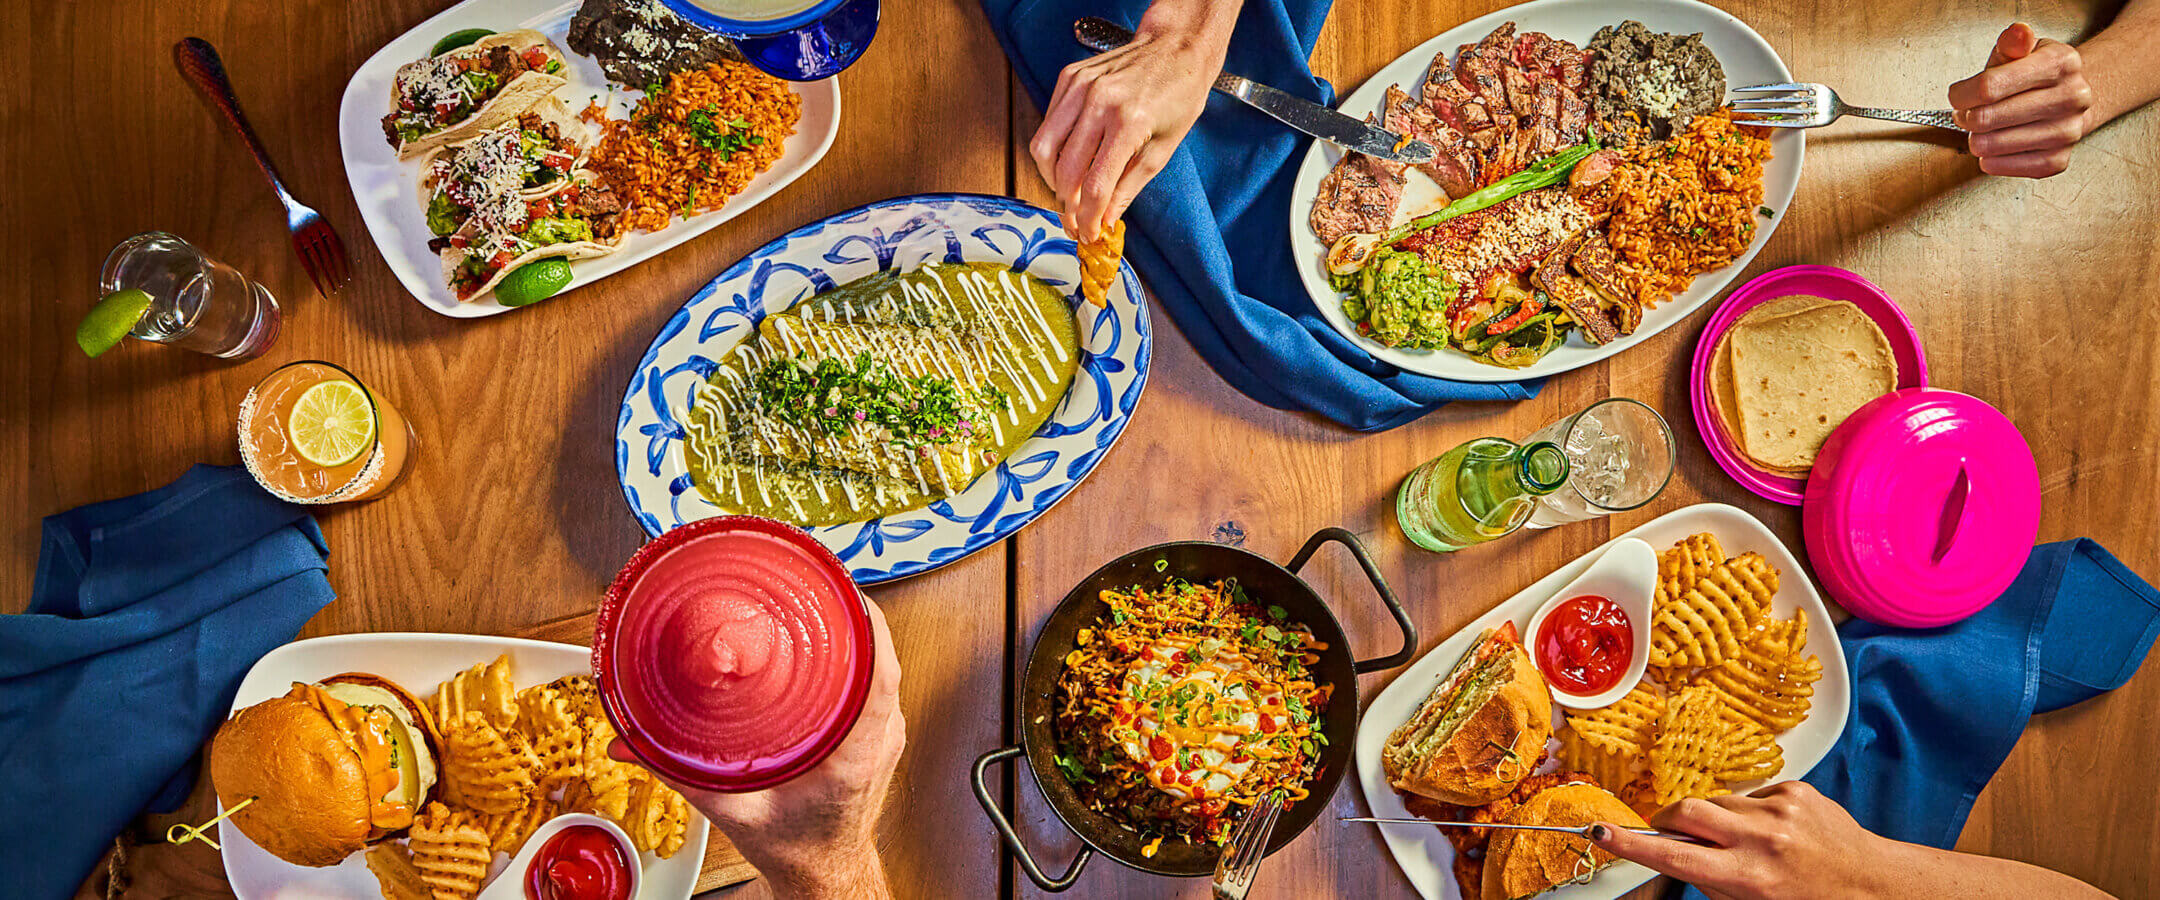 View of Mexican food on table and hands with utensils